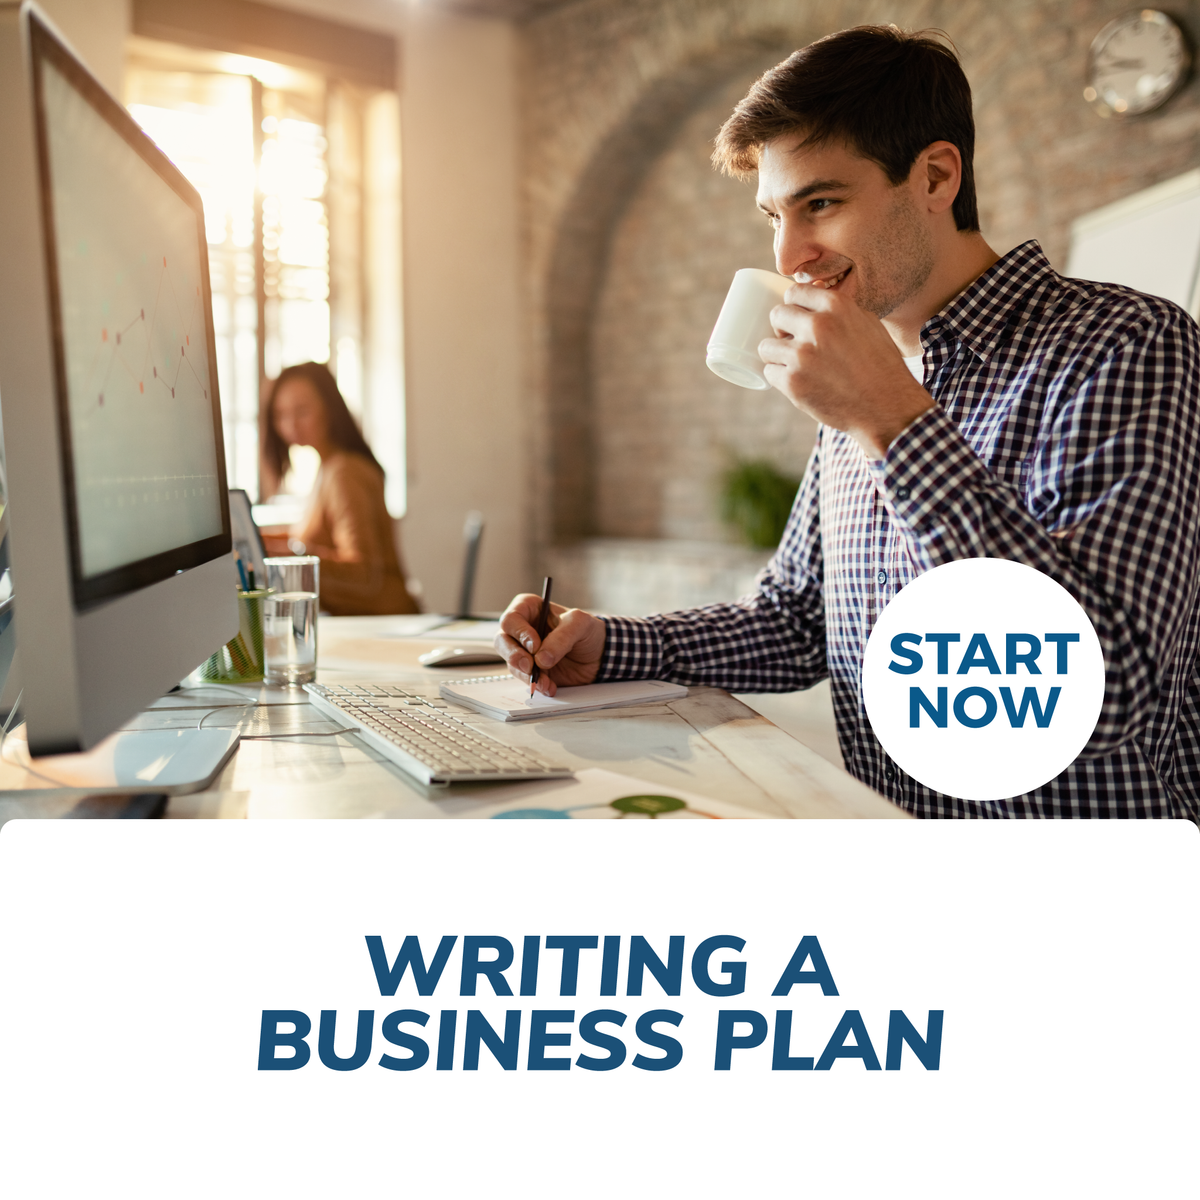 writing a business plan course